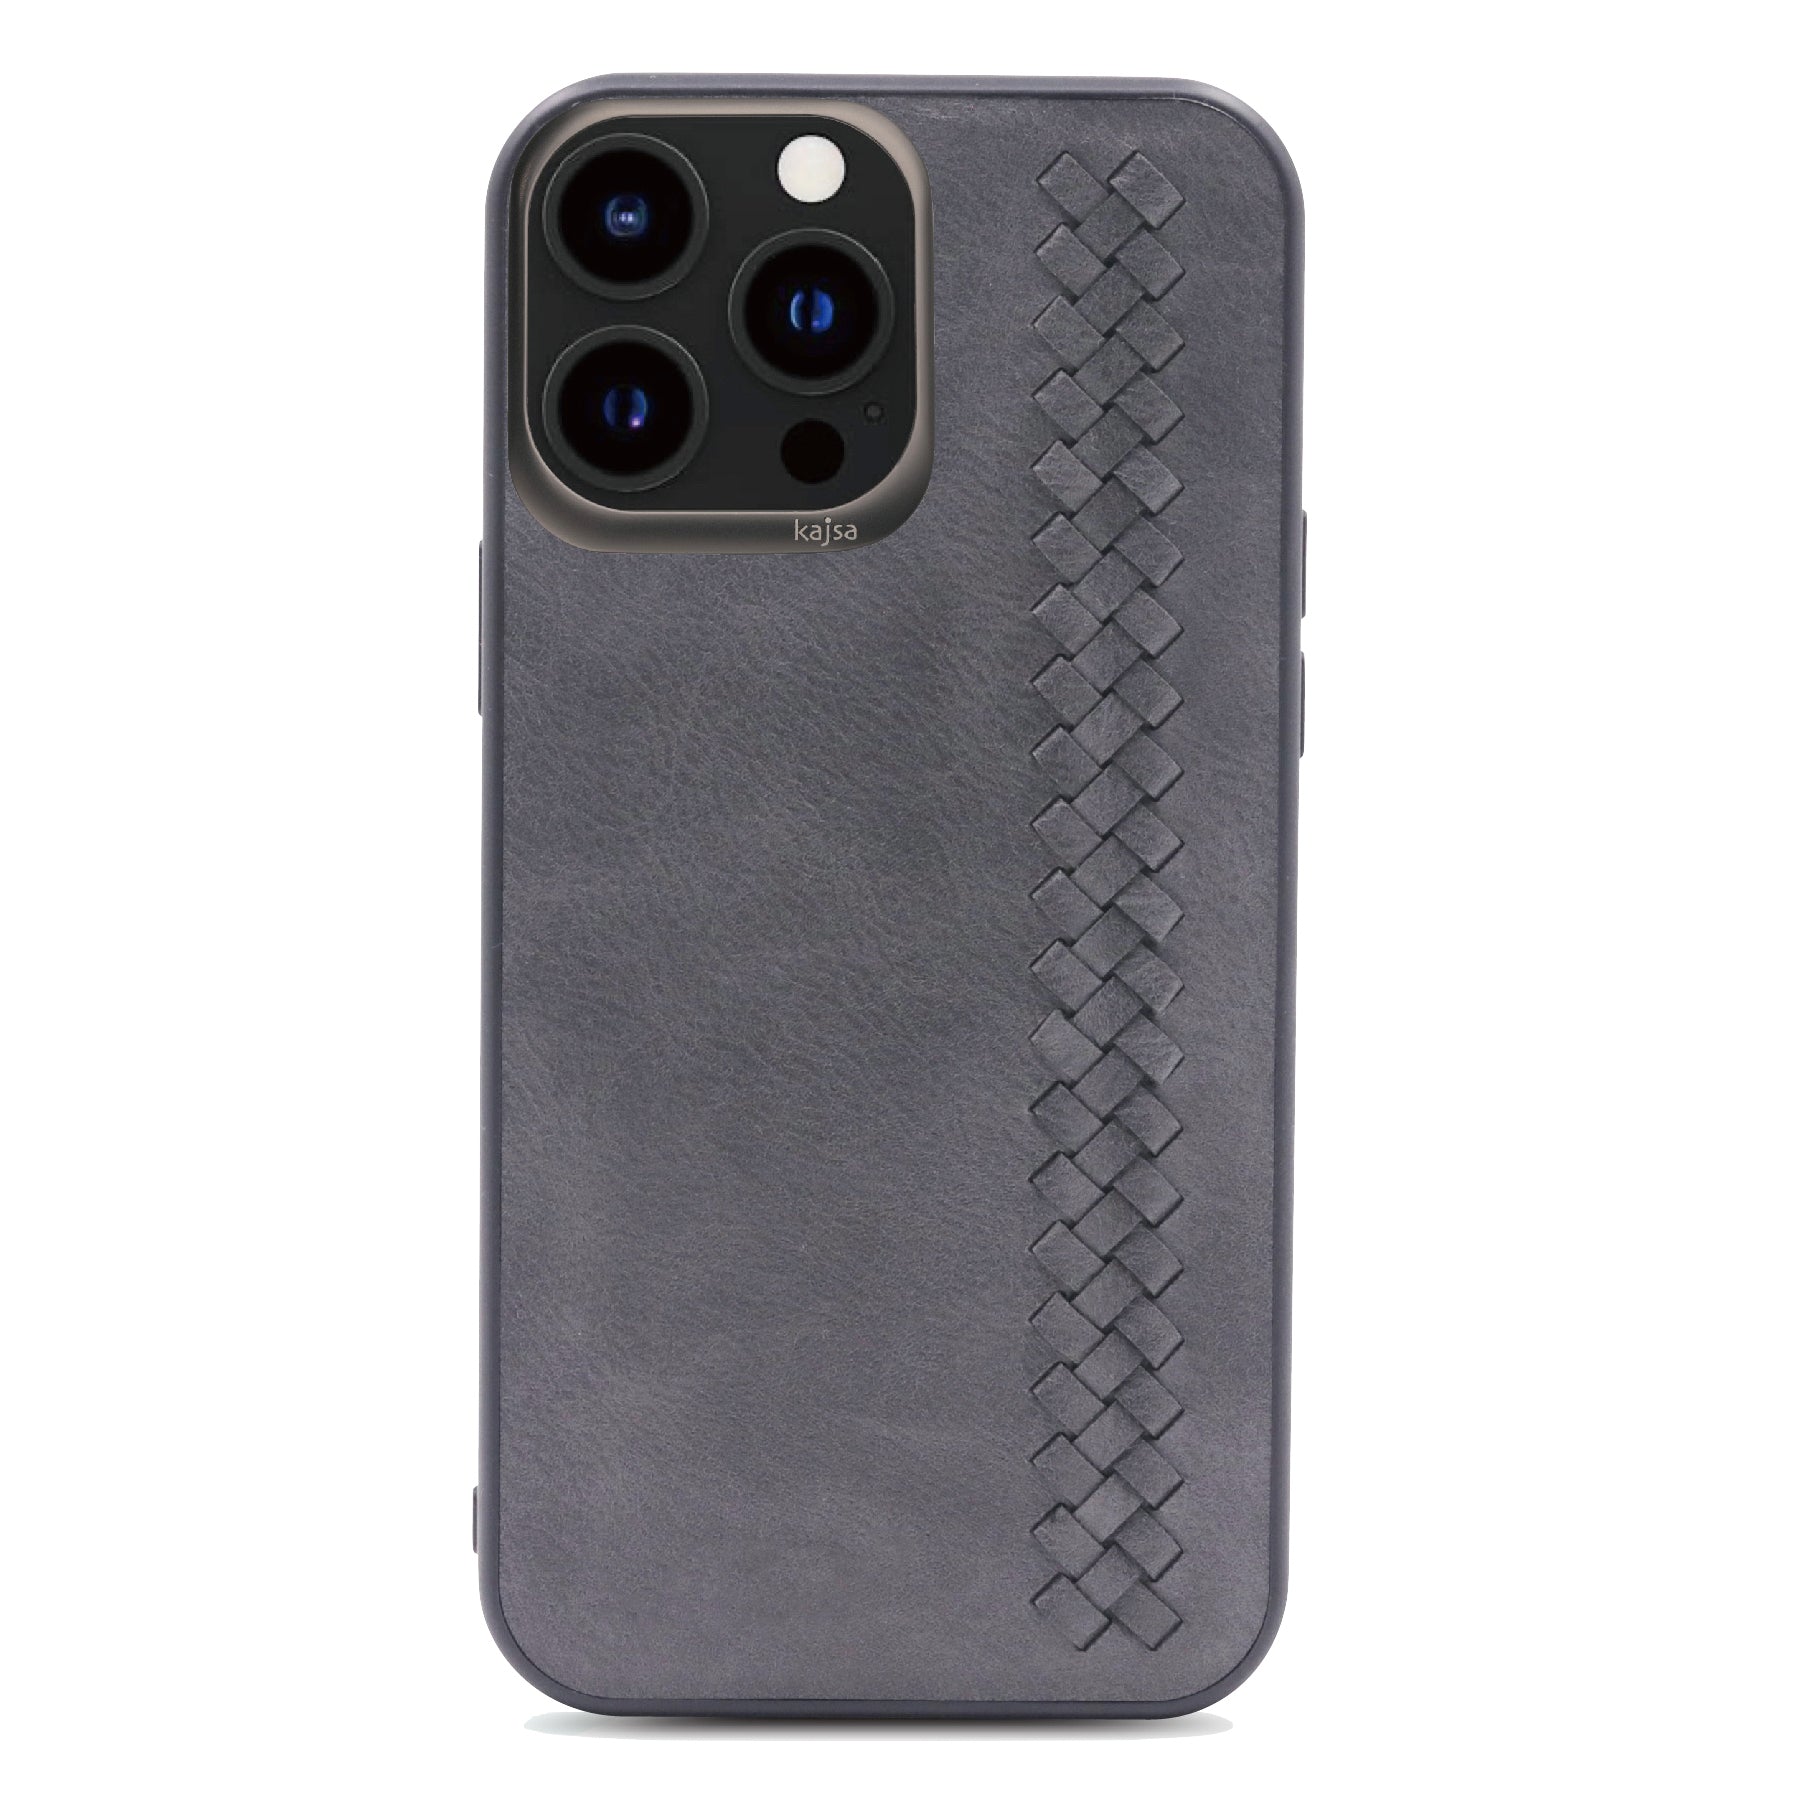 Preppie Collection - Vertical Weave Back Case for iPhone 13-Phone Case- phone case - phone cases- phone cover- iphone cover- iphone case- iphone cases- leather case- leather cases- DIYCASE - custom case - leather cover - hand strap case - croco pattern case - snake pattern case - carbon fiber phone case - phone case brand - unique phone case - high quality - phone case brand - protective case - buy phone case hong kong - online buy phone case - iphone‎手機殼 - 客製化手機殼 - samsung ‎手機殼 - 香港手機殼 - 買電話殼